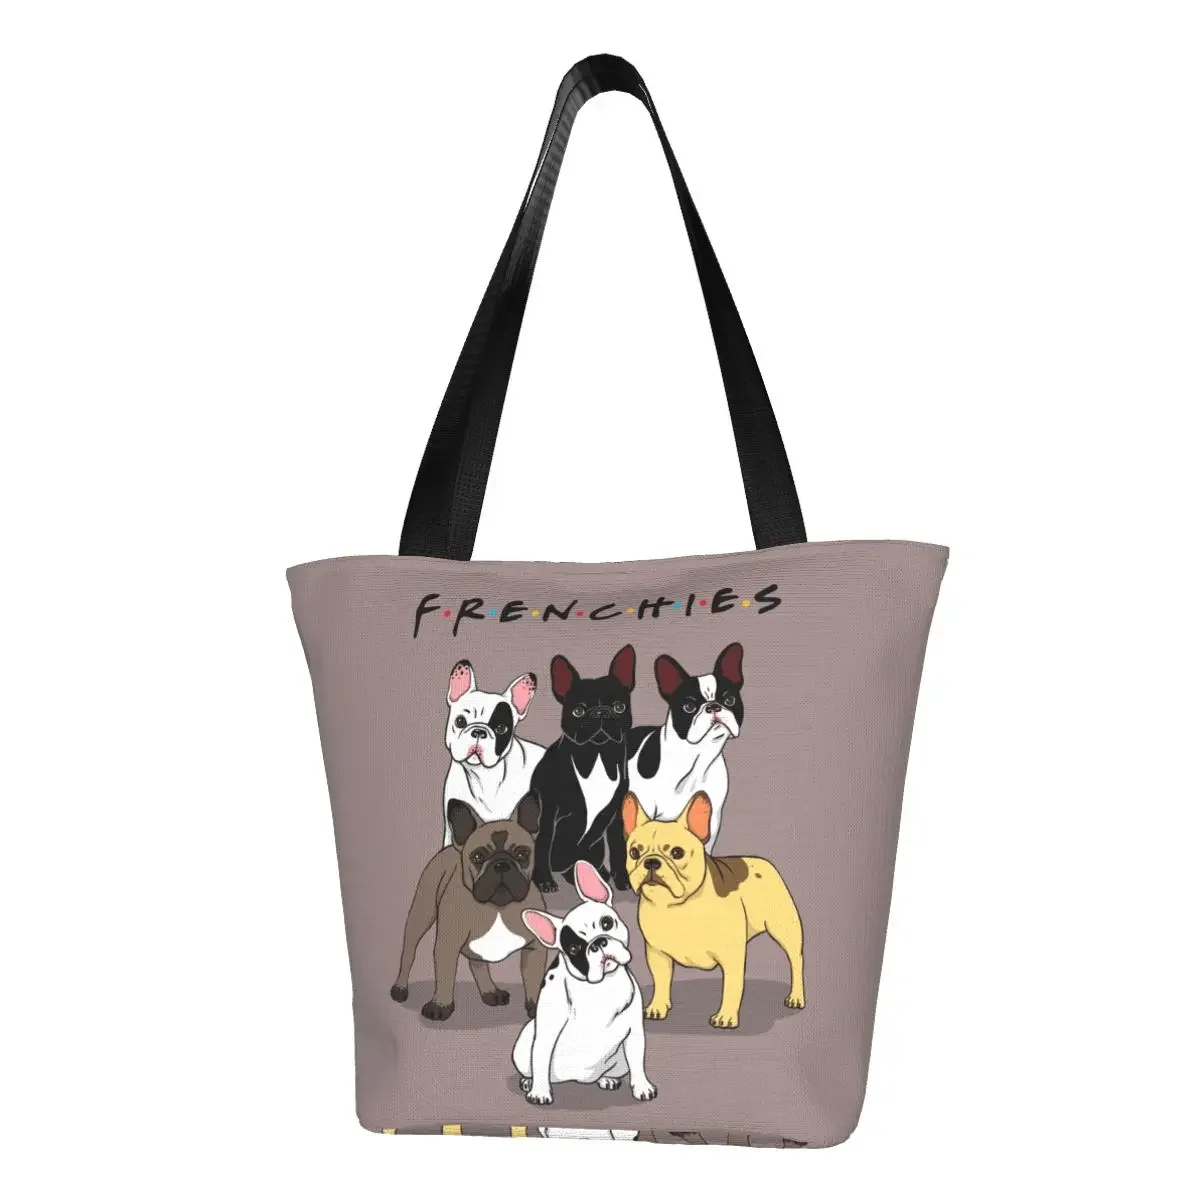 

Funny Funny Frenchies French Bulldog Shopping Tote Bags Recycling Dog Animal Grocery Canvas Shopper Shoulder Bag